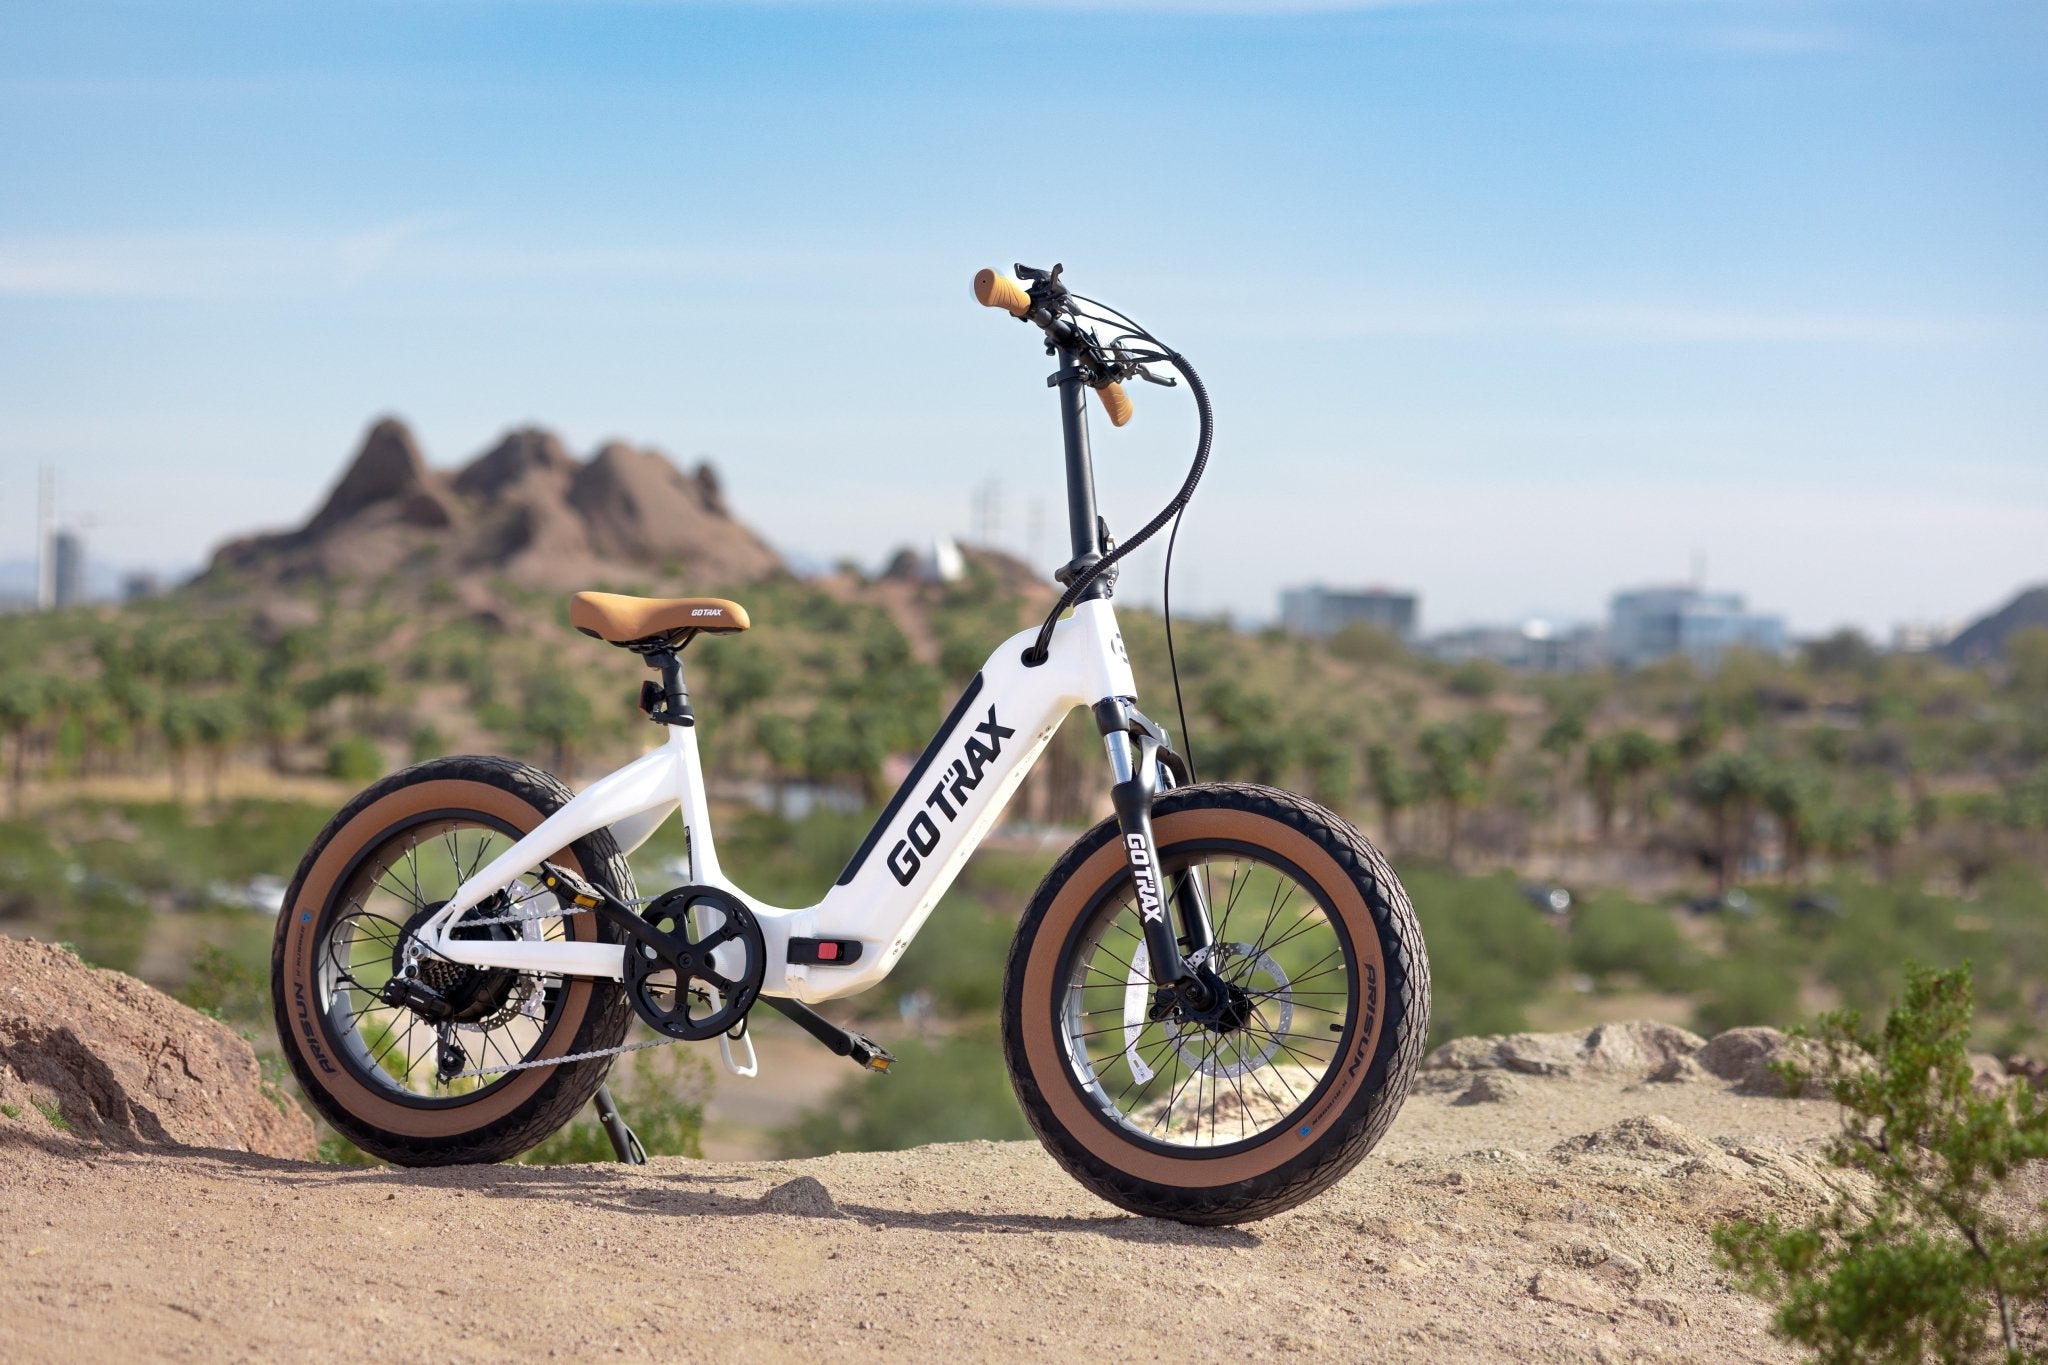 Product Overview: The F5 Electric Bike - GOTRAX